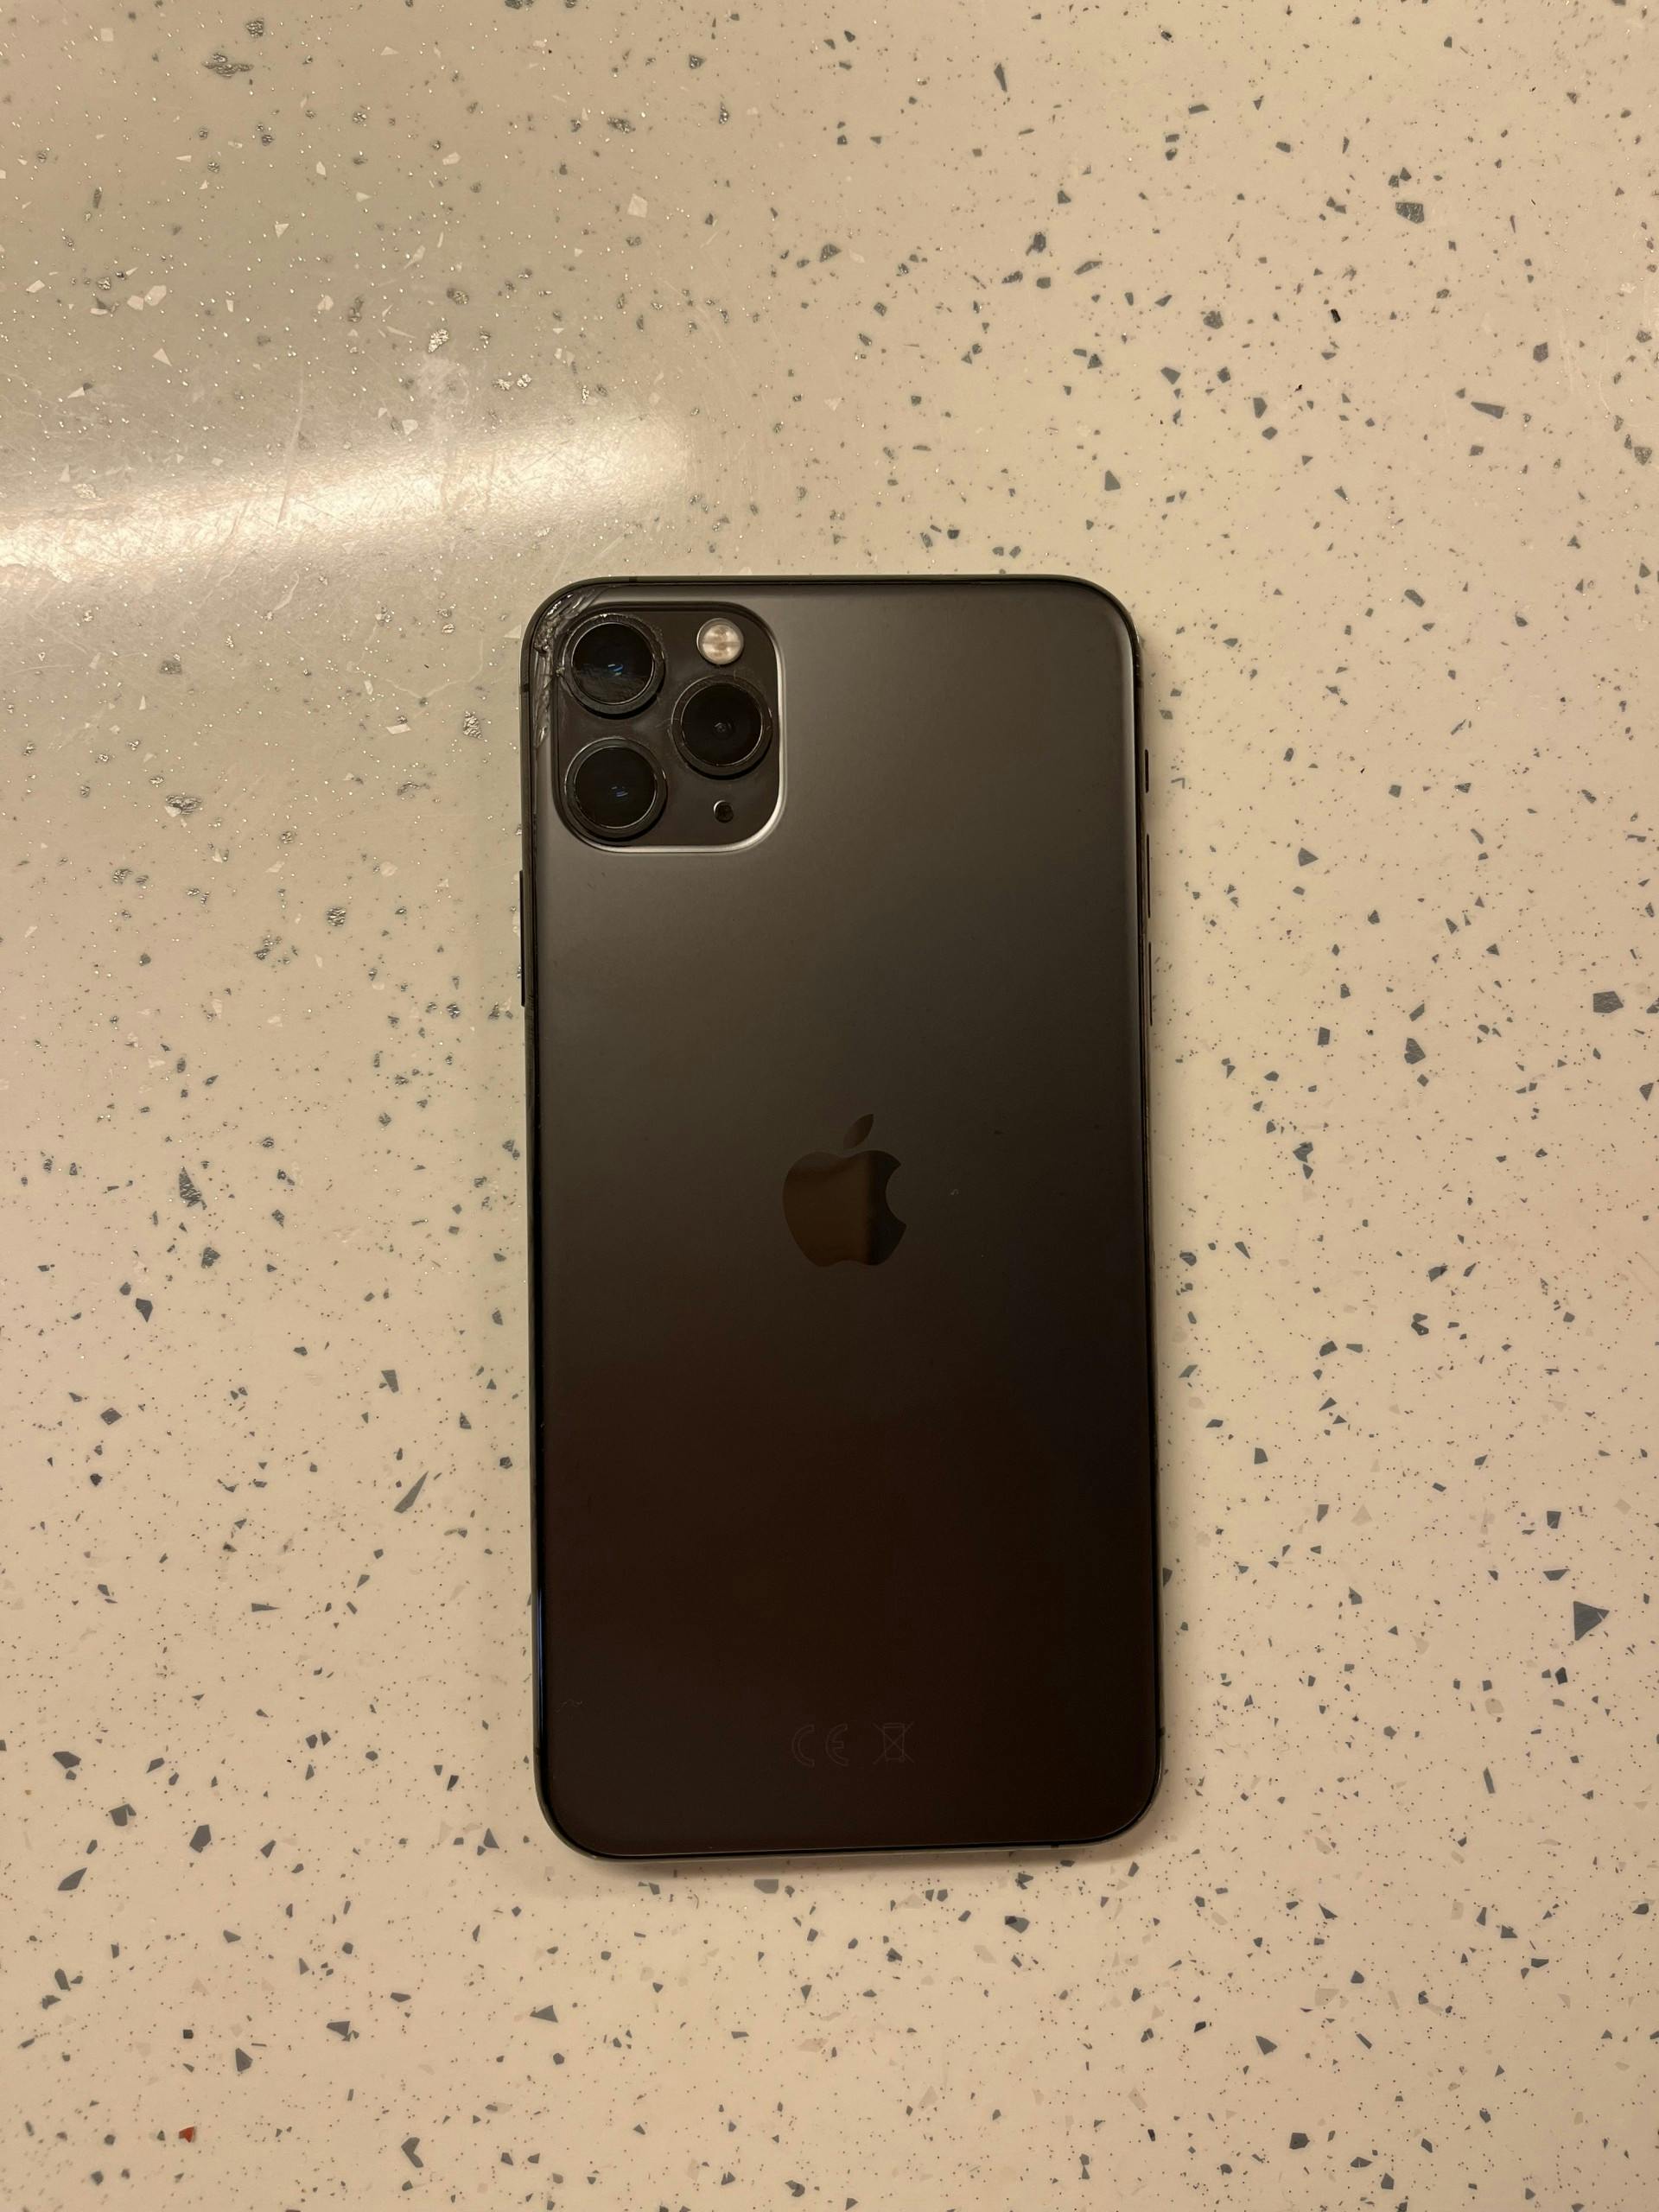 Apple iPhone 11 Pro Max 256GB Matte Space Gray